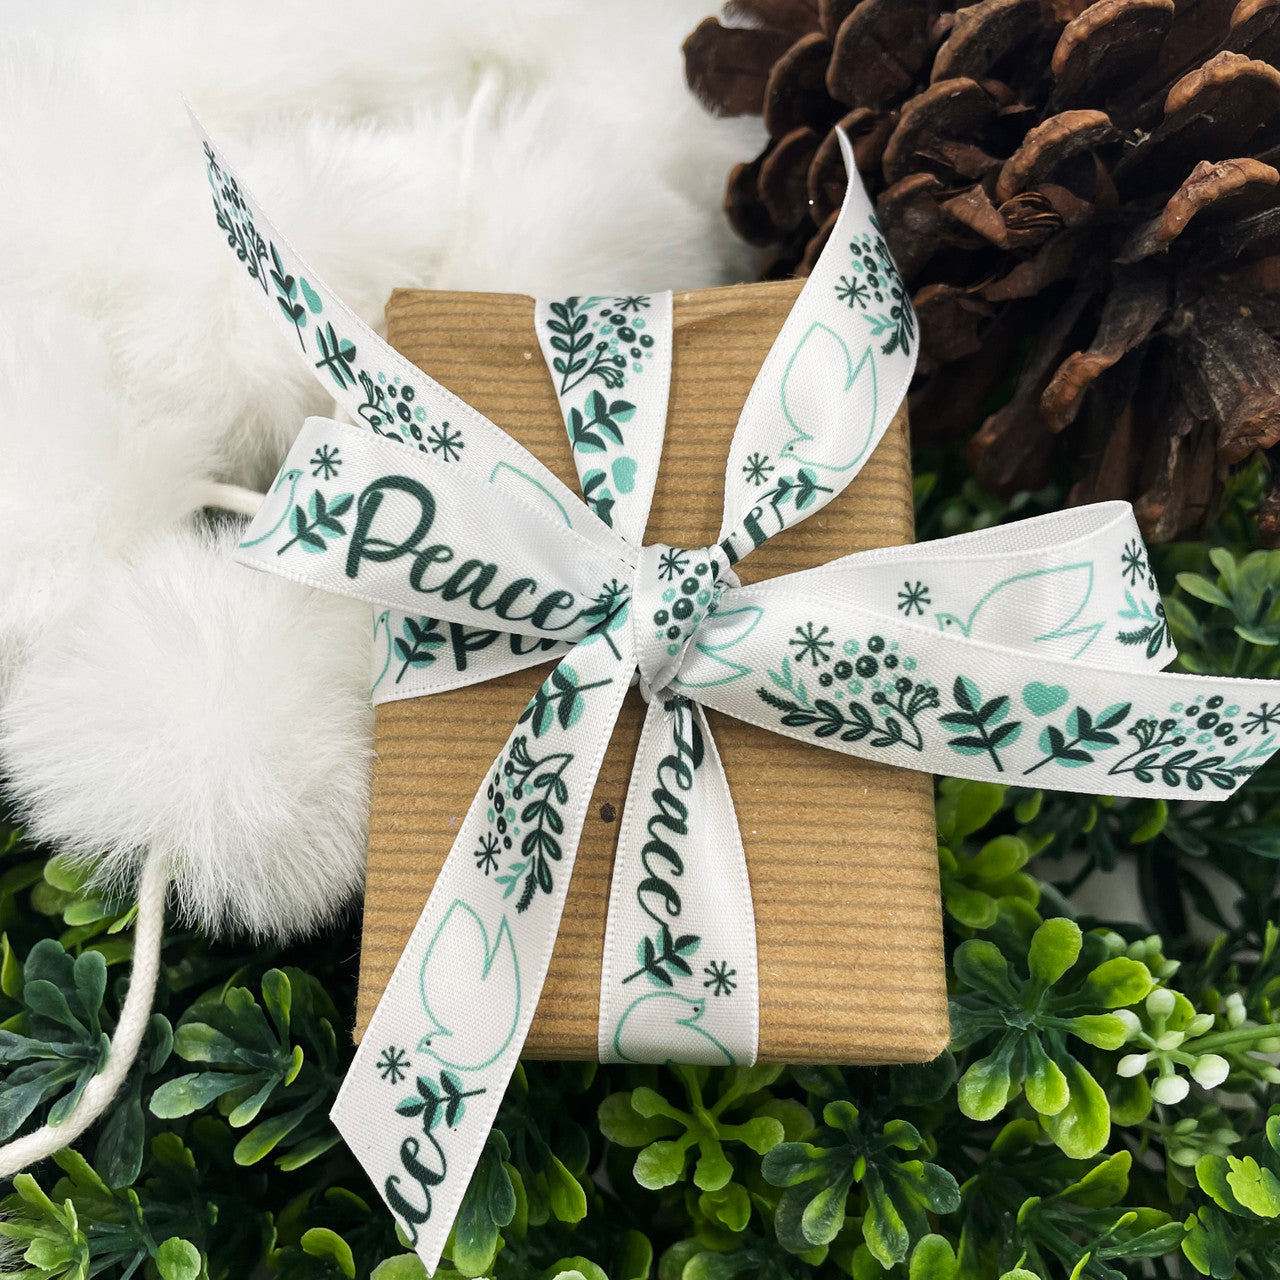 Our sweet Peace ribbon ties a lovely bow with the sentiment we wish for all! 